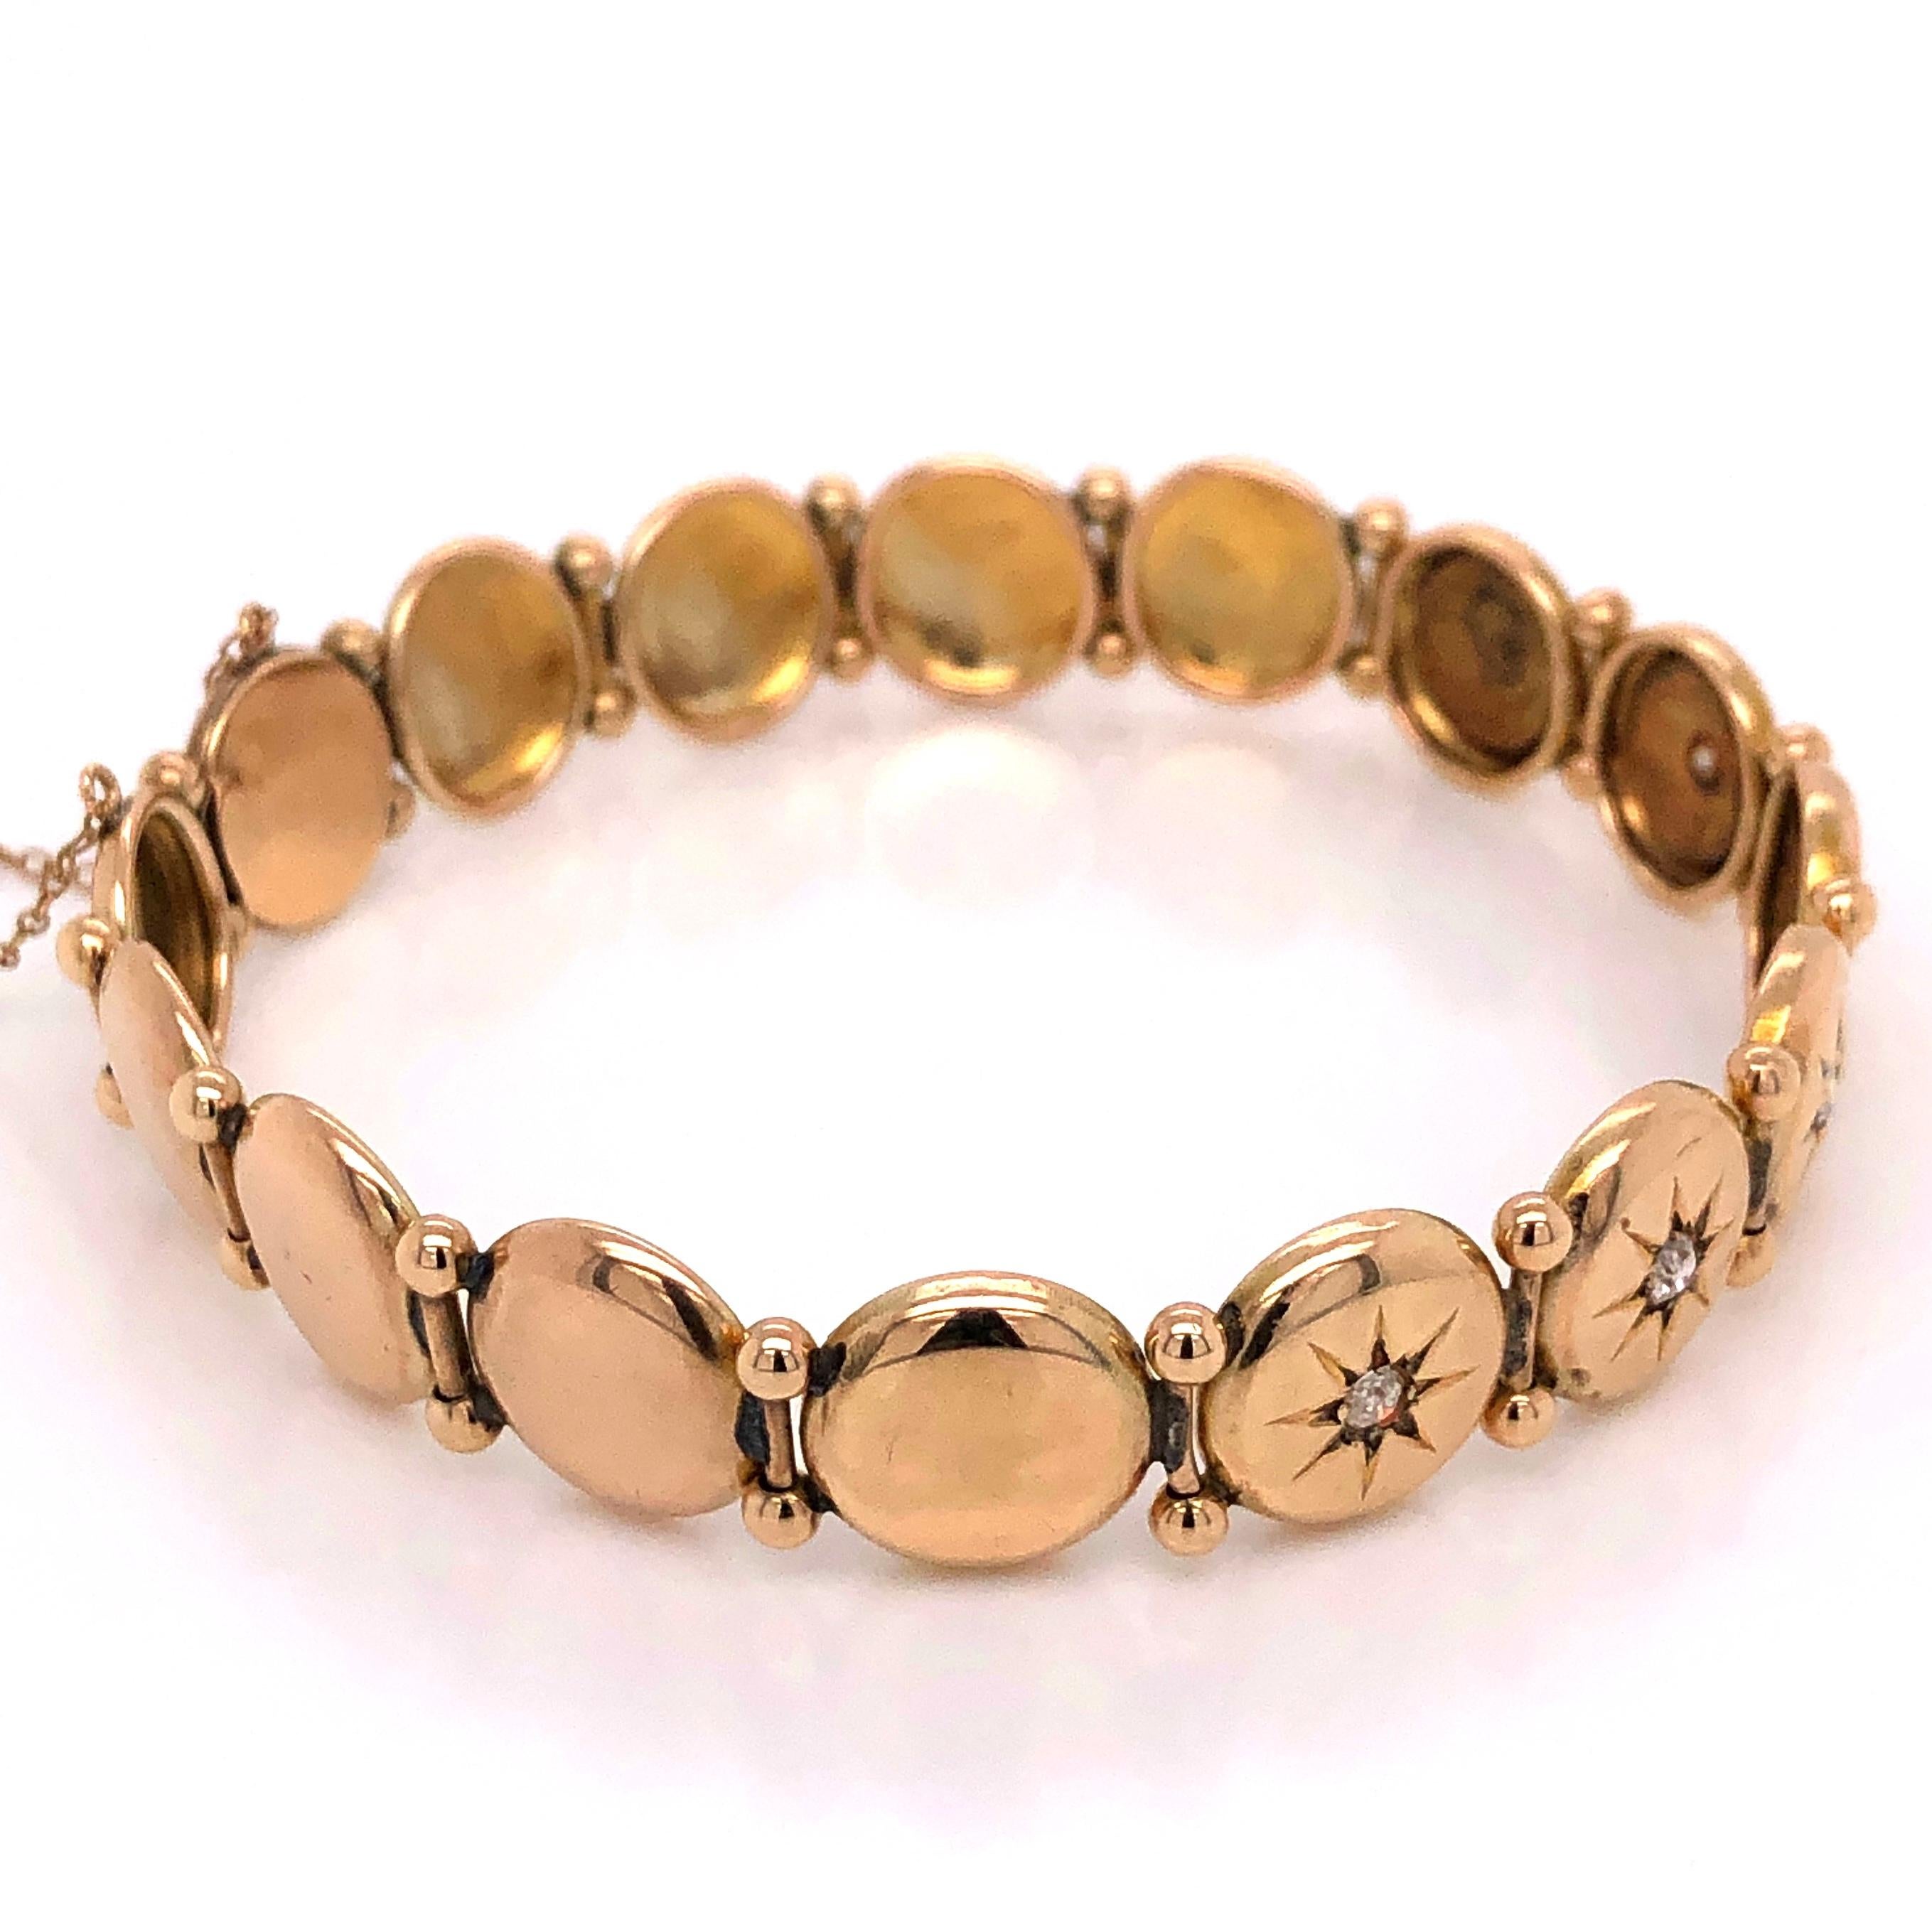 Simply Beautiful Victorian Antique Gold Link Bracelet, center of each station securely Hand set with a Diamond. approx. 0.27tcw. Bracelet measures approx. 7.25” Long. Hand crafted in 12K Yellow Gold. Illuminate your look with Timeless Beauty with